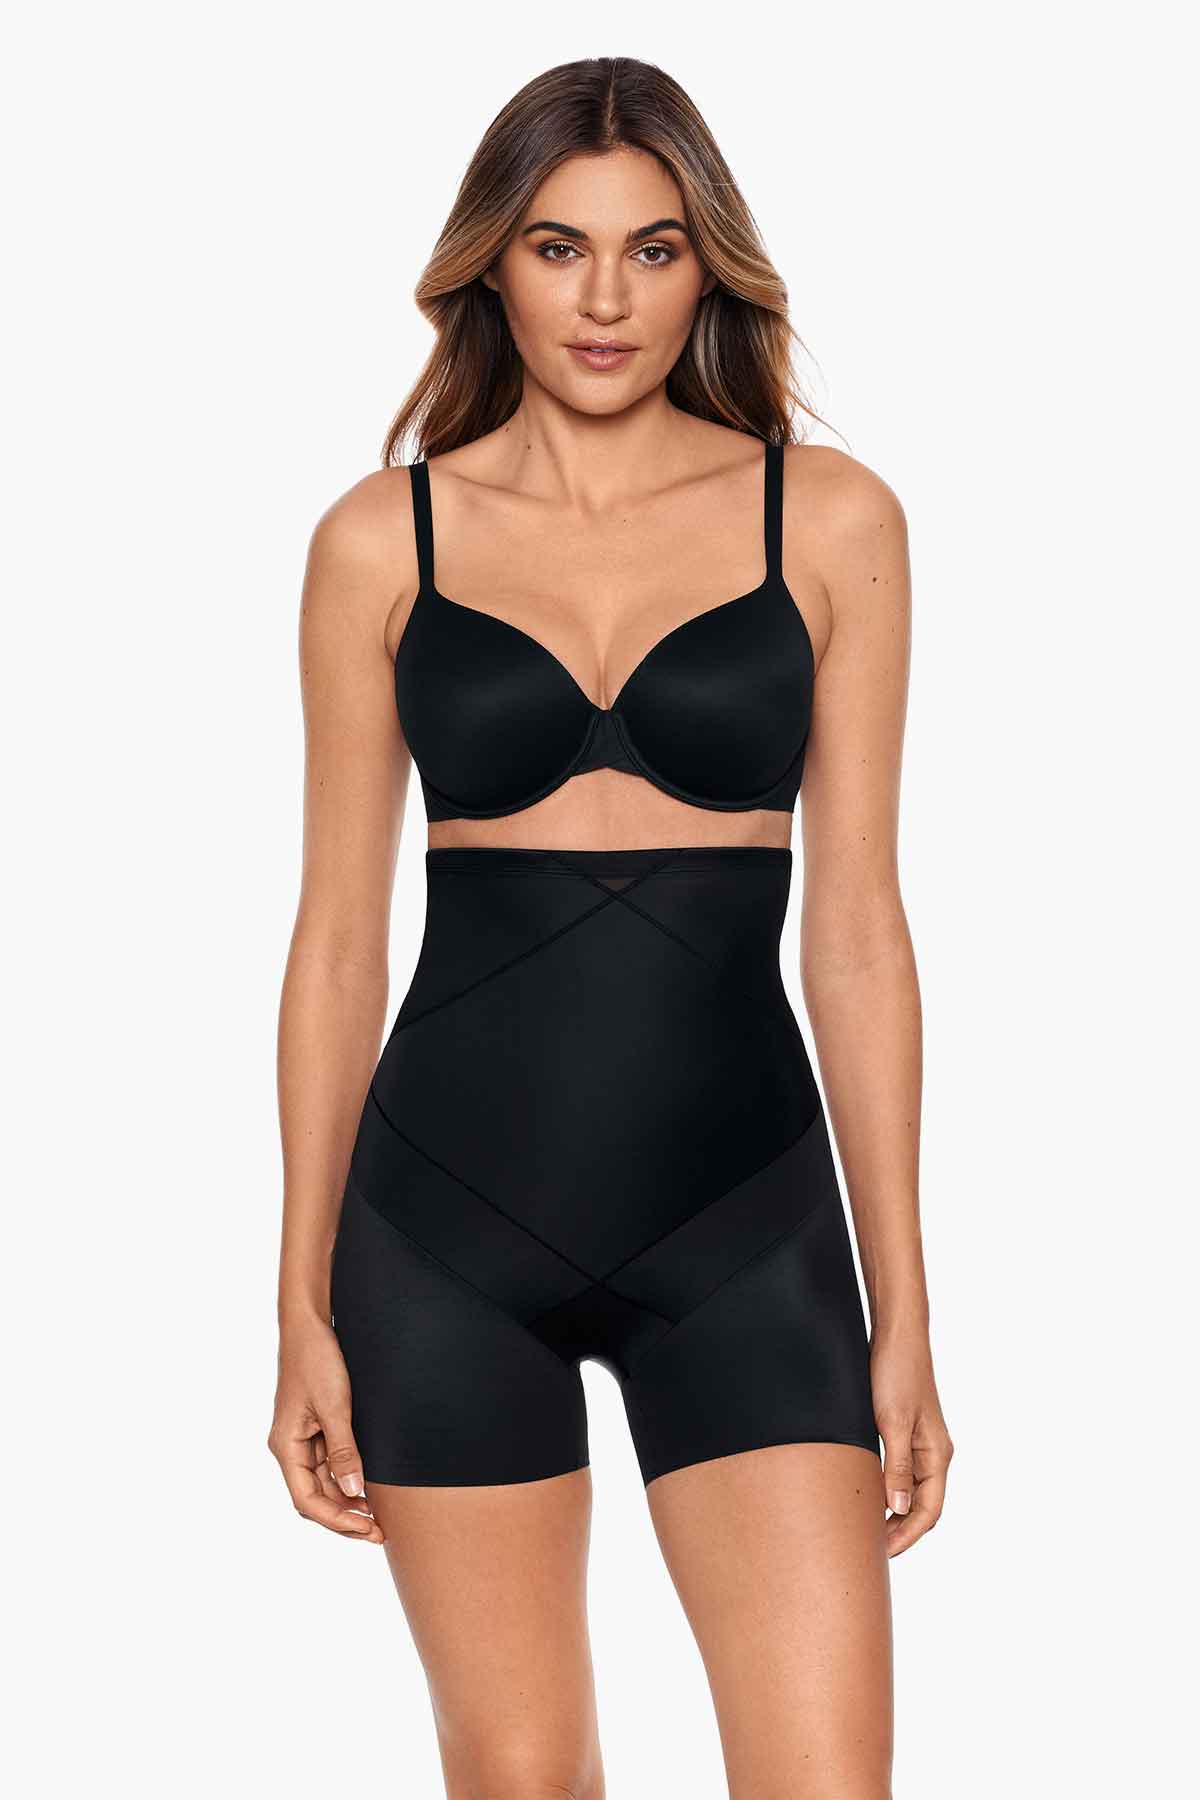 Best Selling Shapewear – Miraclesuit